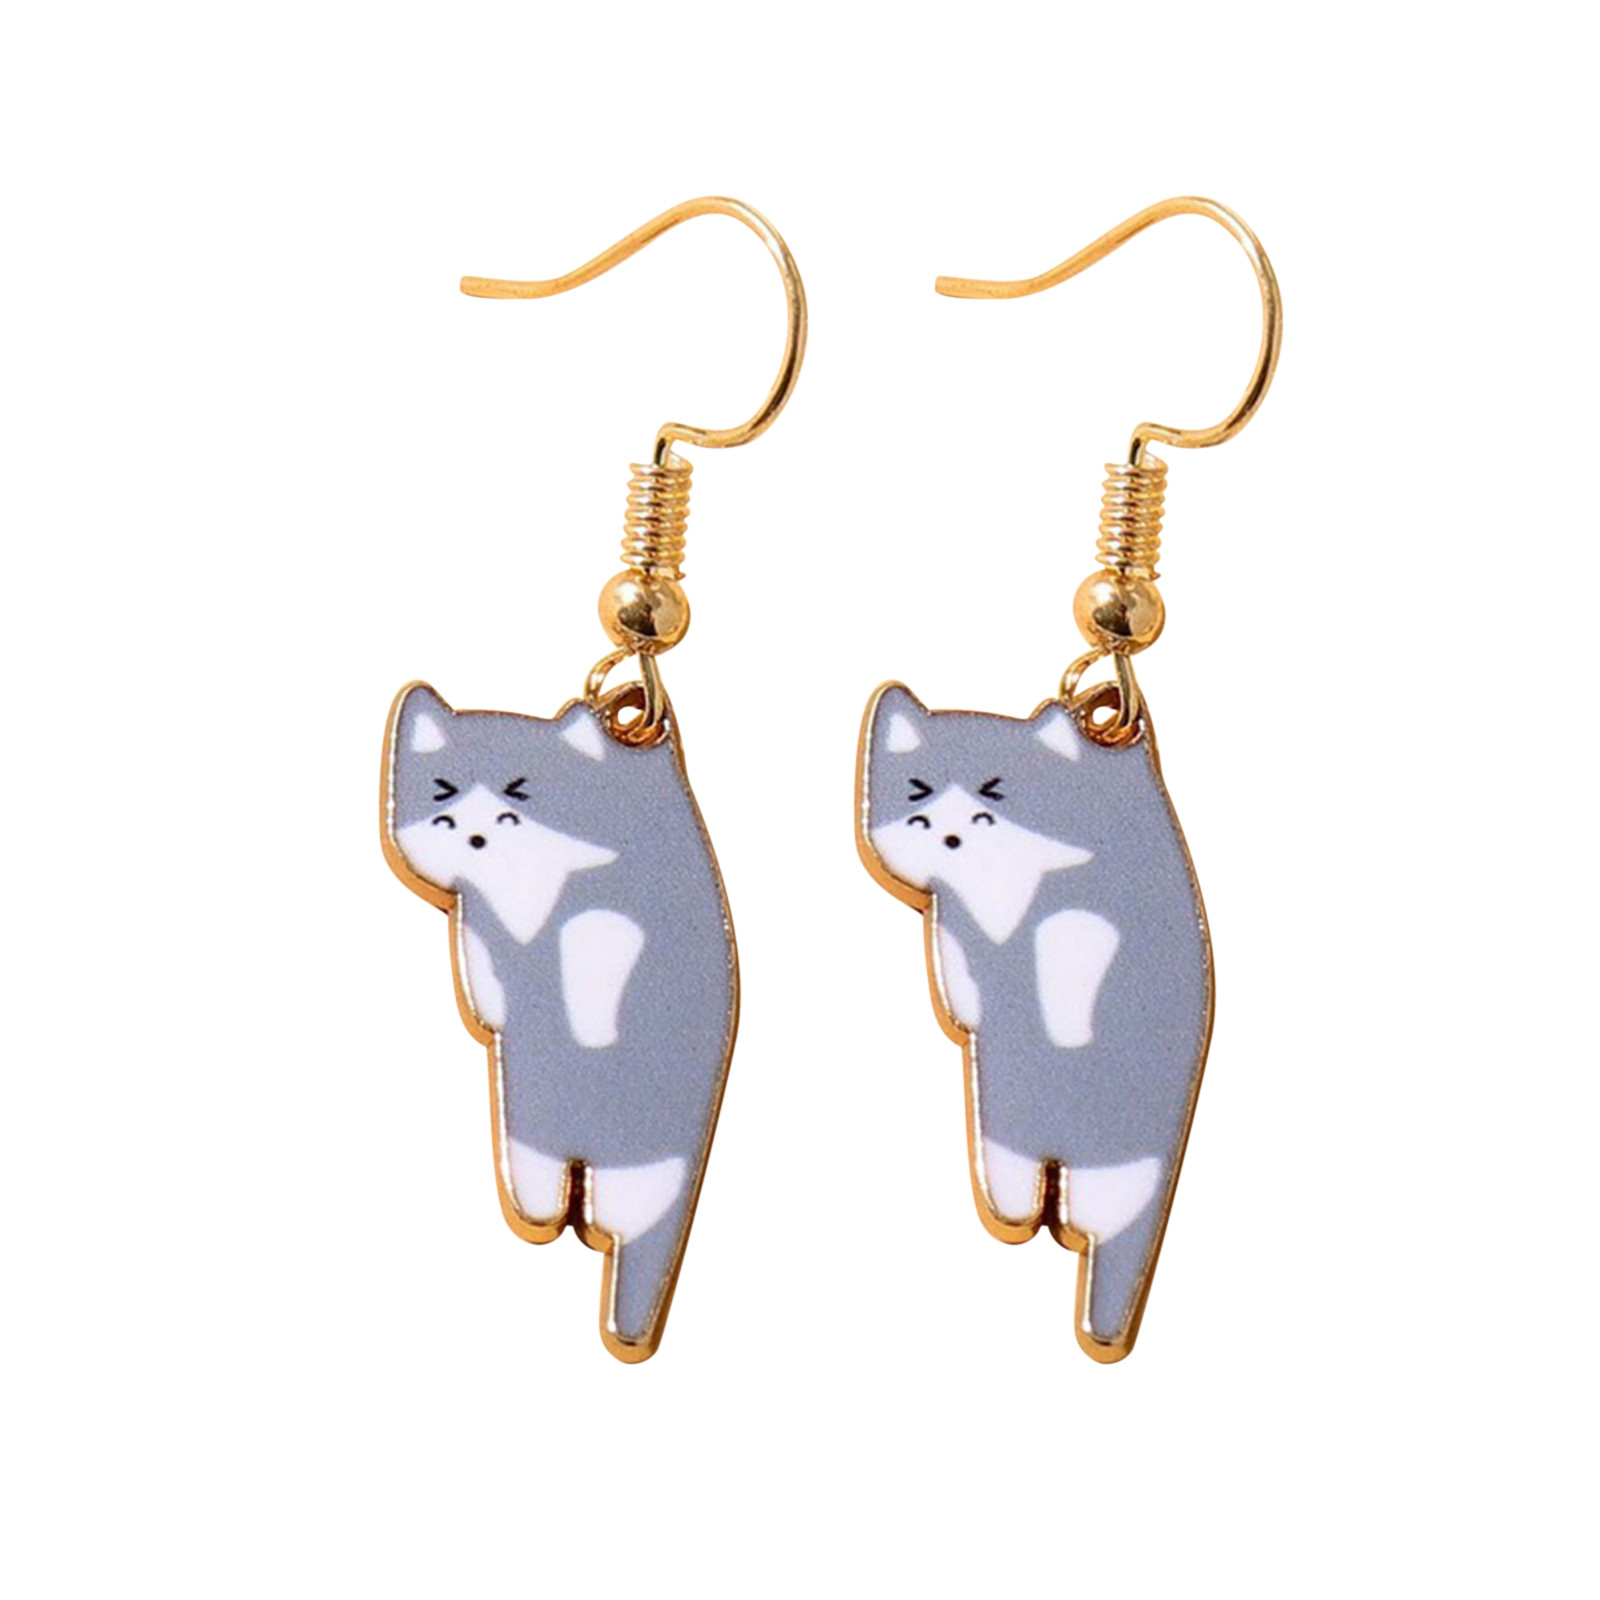 Kayannuo Clearance Cute Cat Dangle Earrings Dangle Cat Earrings Alloy Drop Earrings With Hypoallergenic French Hook Animal - image 1 of 3